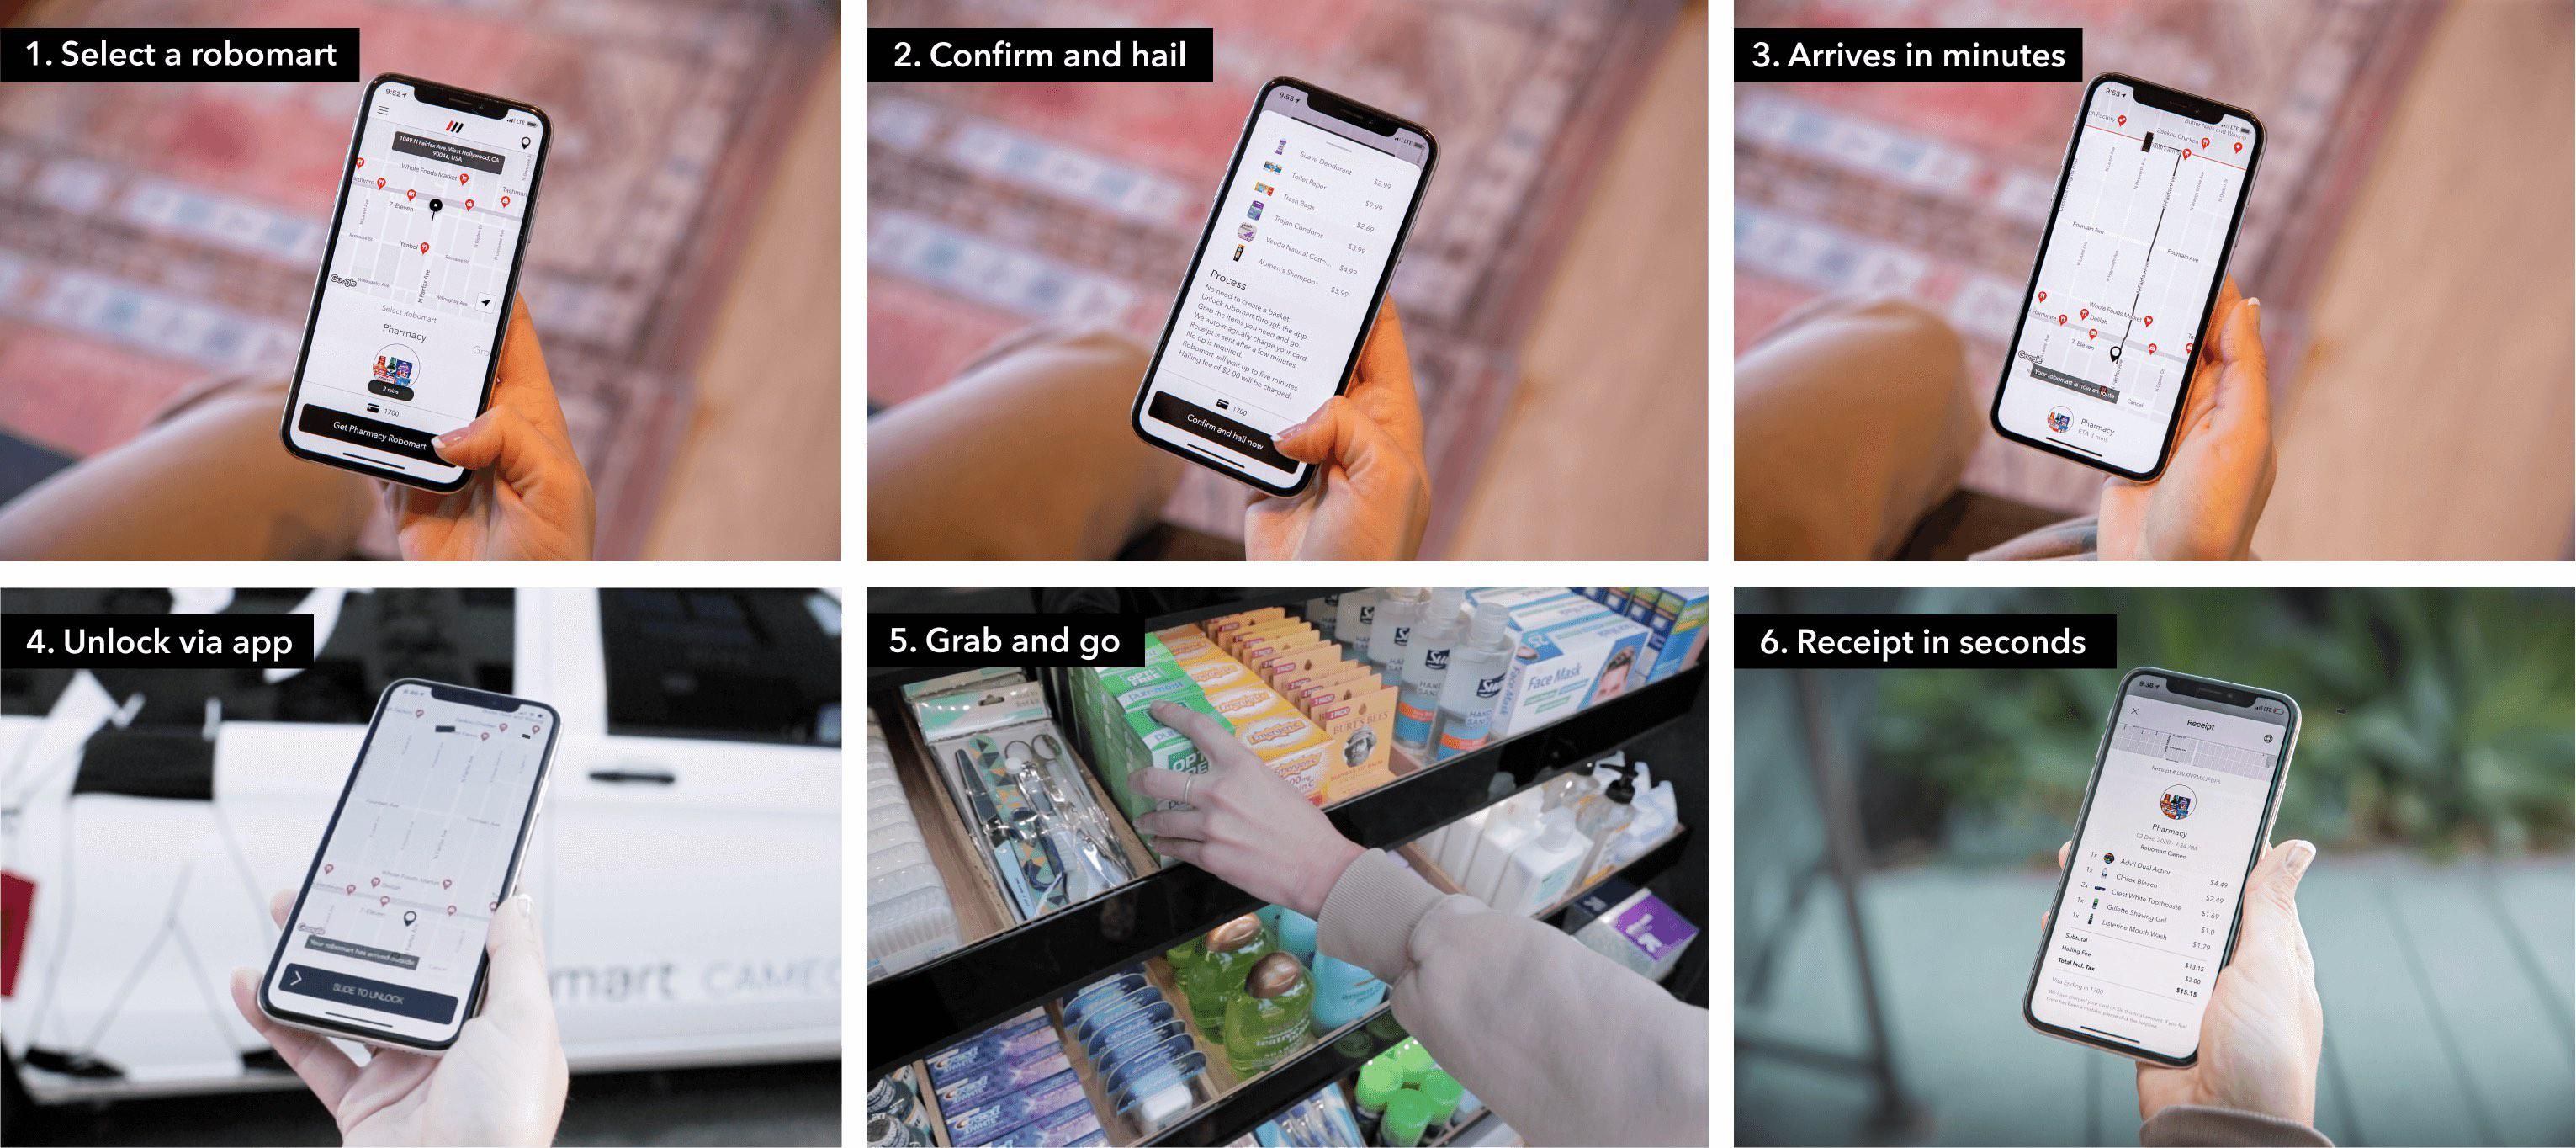 We Tried Robomart’s Mobile Pharmacy. Here’s How It Went.